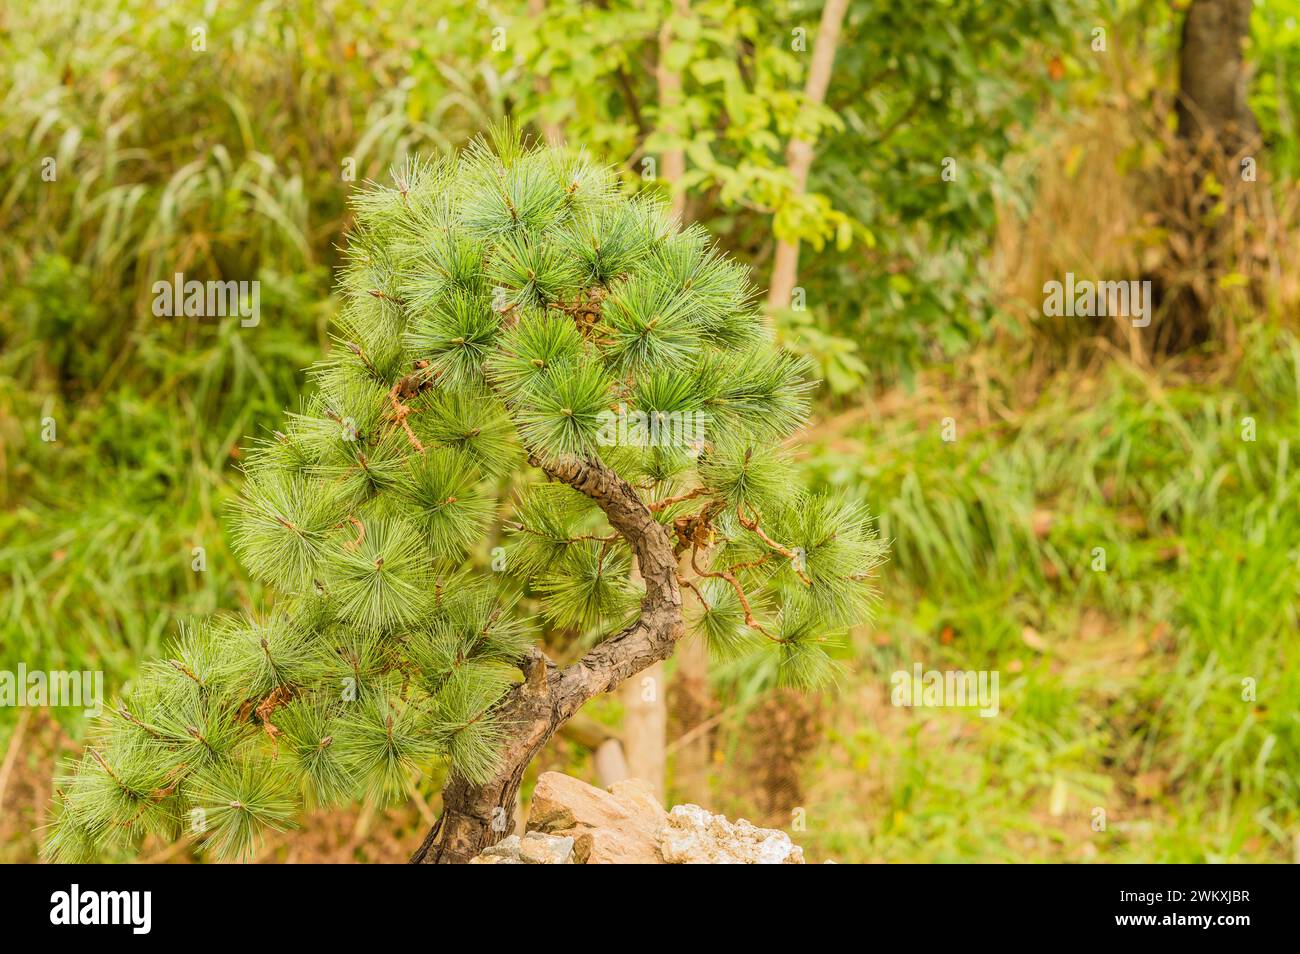 A small pine tree resembling a bonsai with dense green needles in a natural setting, in South Korea Stock Photo